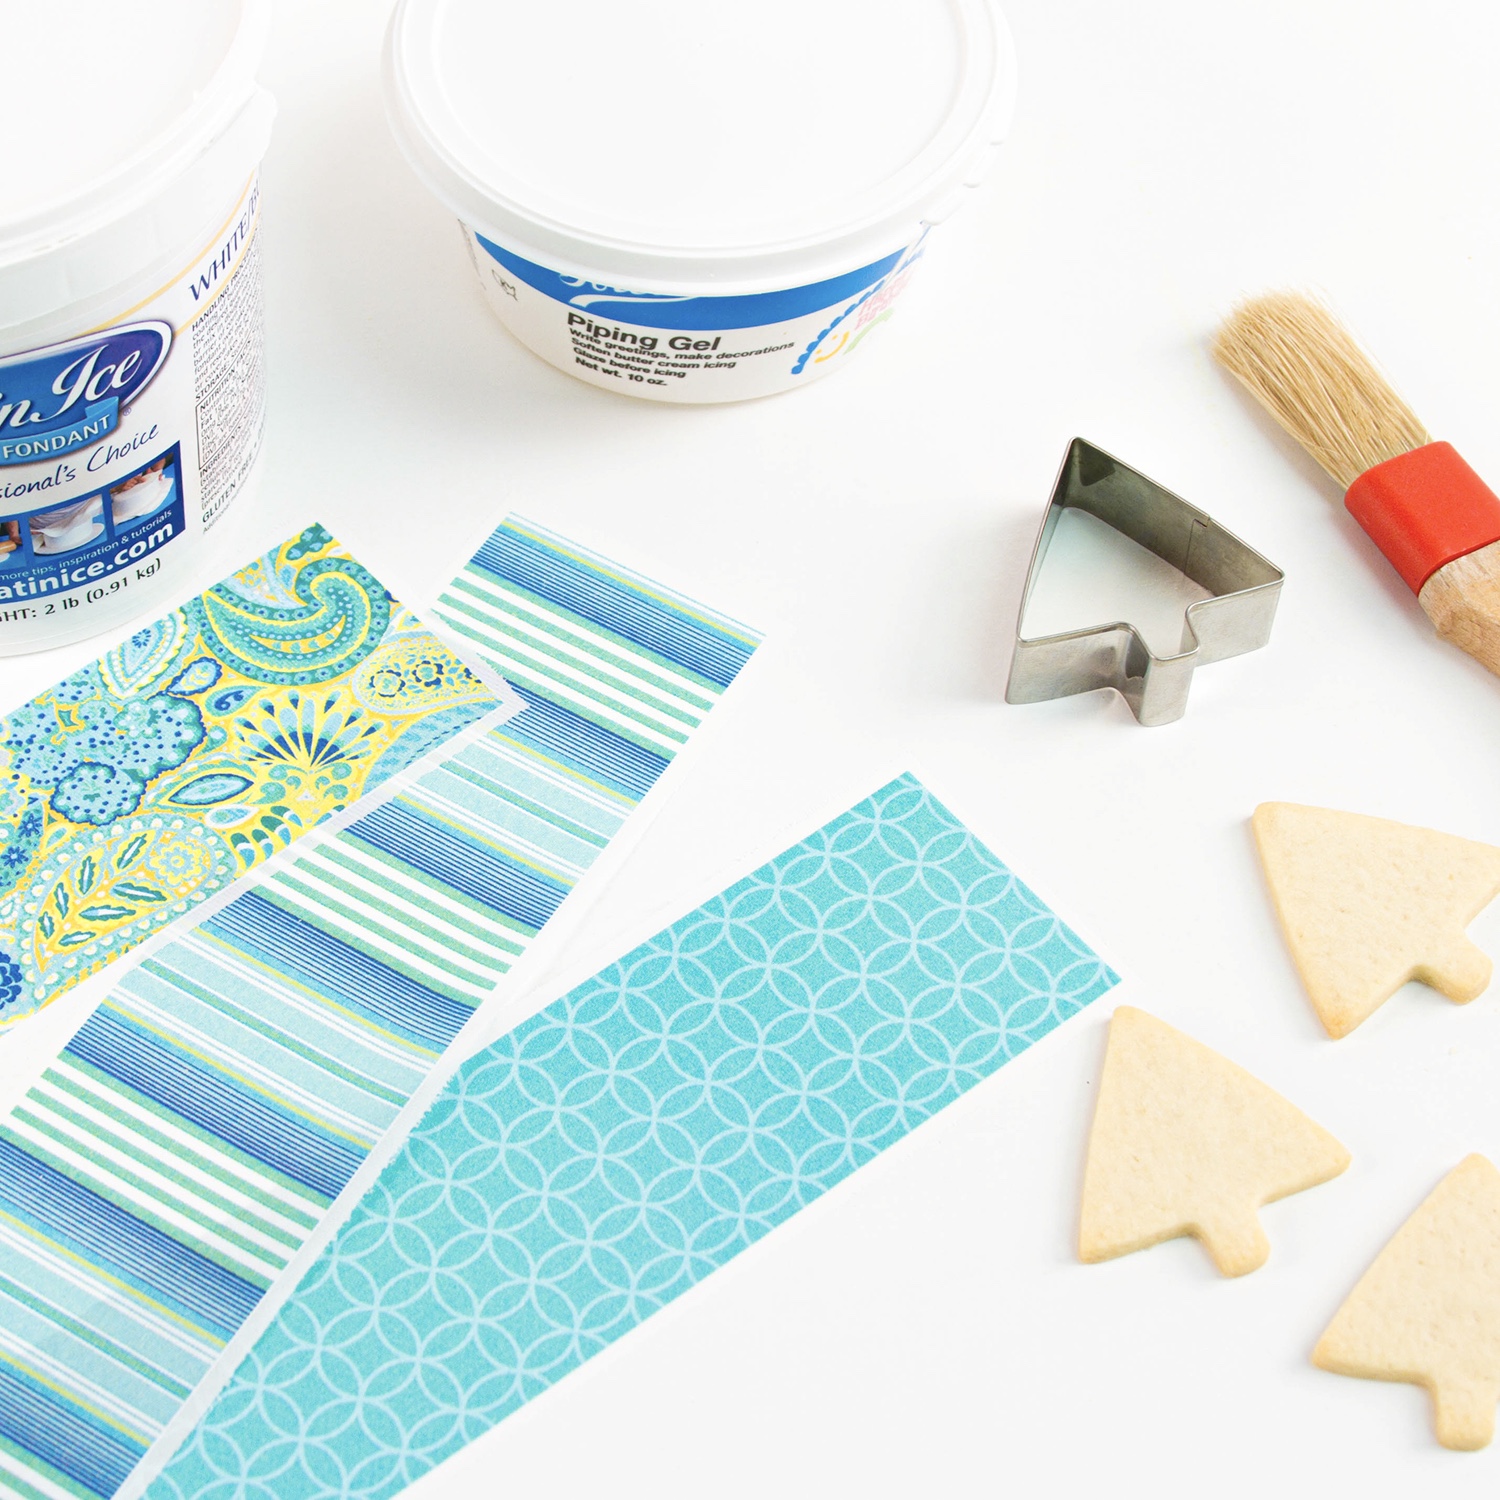 Image of tools used such as piping gel, fondant, edible images, cookie cutter and paint brush